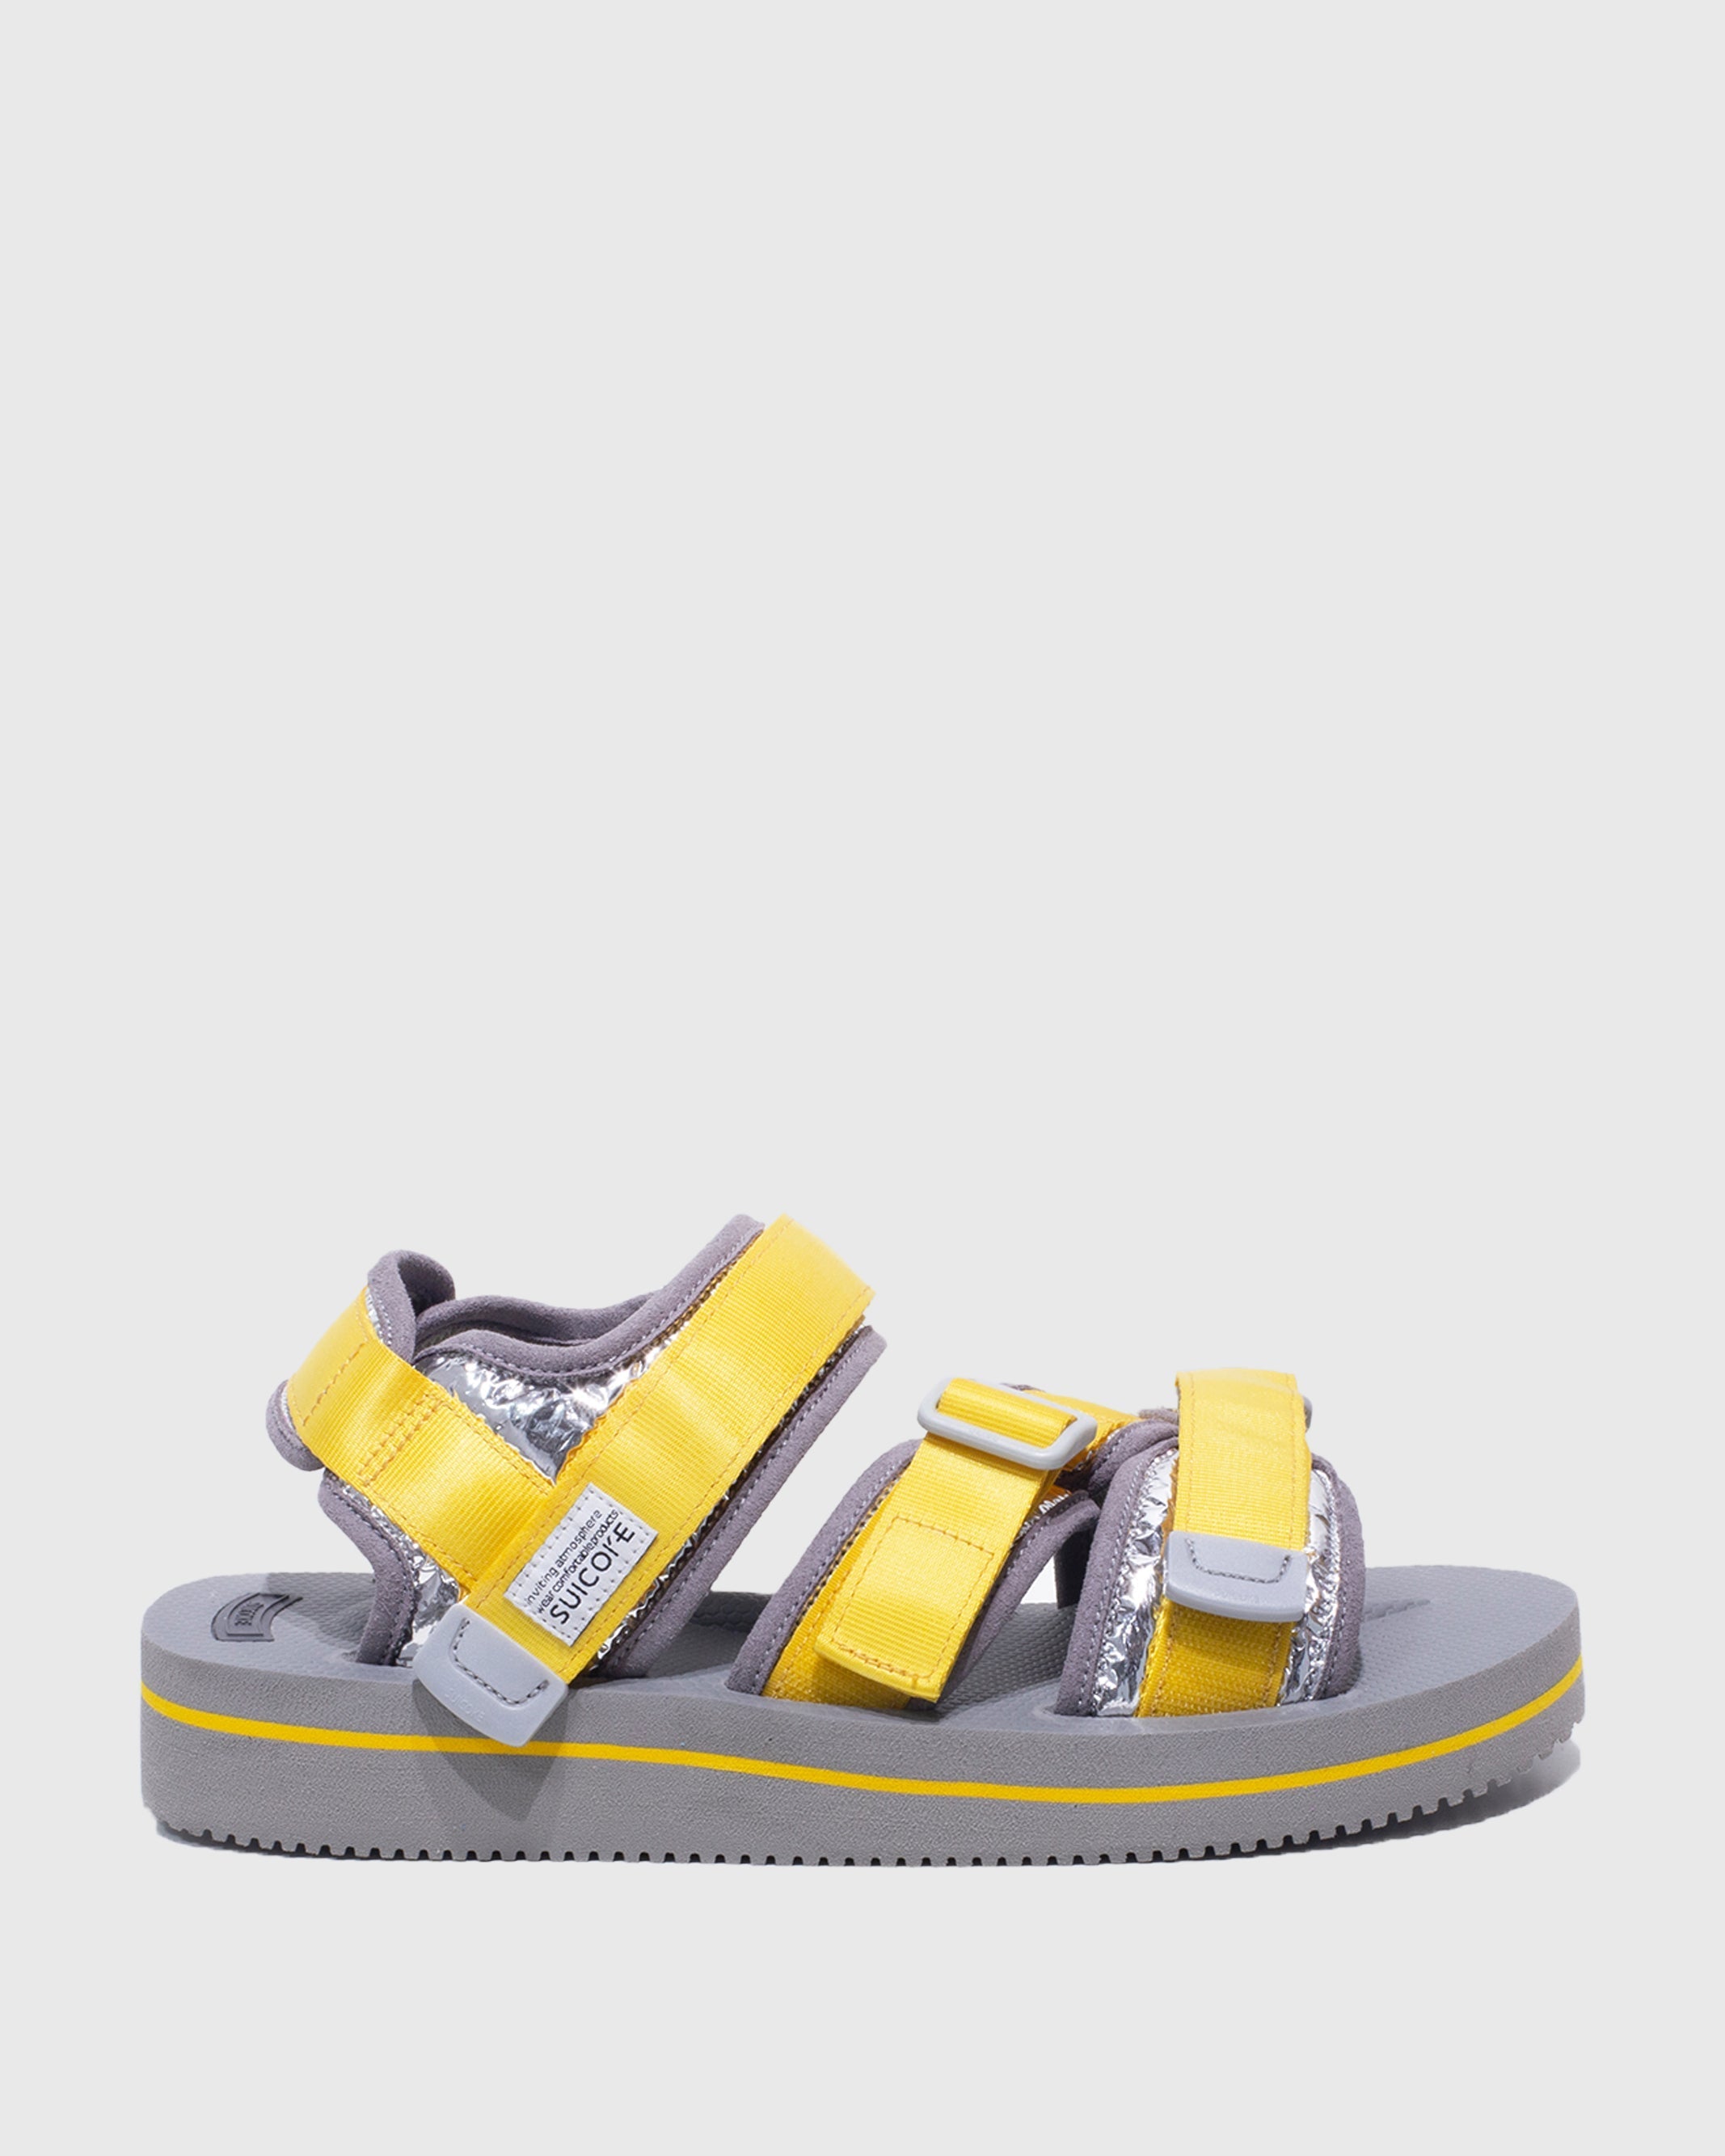 SUICOKE KISEE-VEU3 in Yellow OG-044VEU3 | Shop from eightywingold an official brand partner for SUICOKE Canada and US.